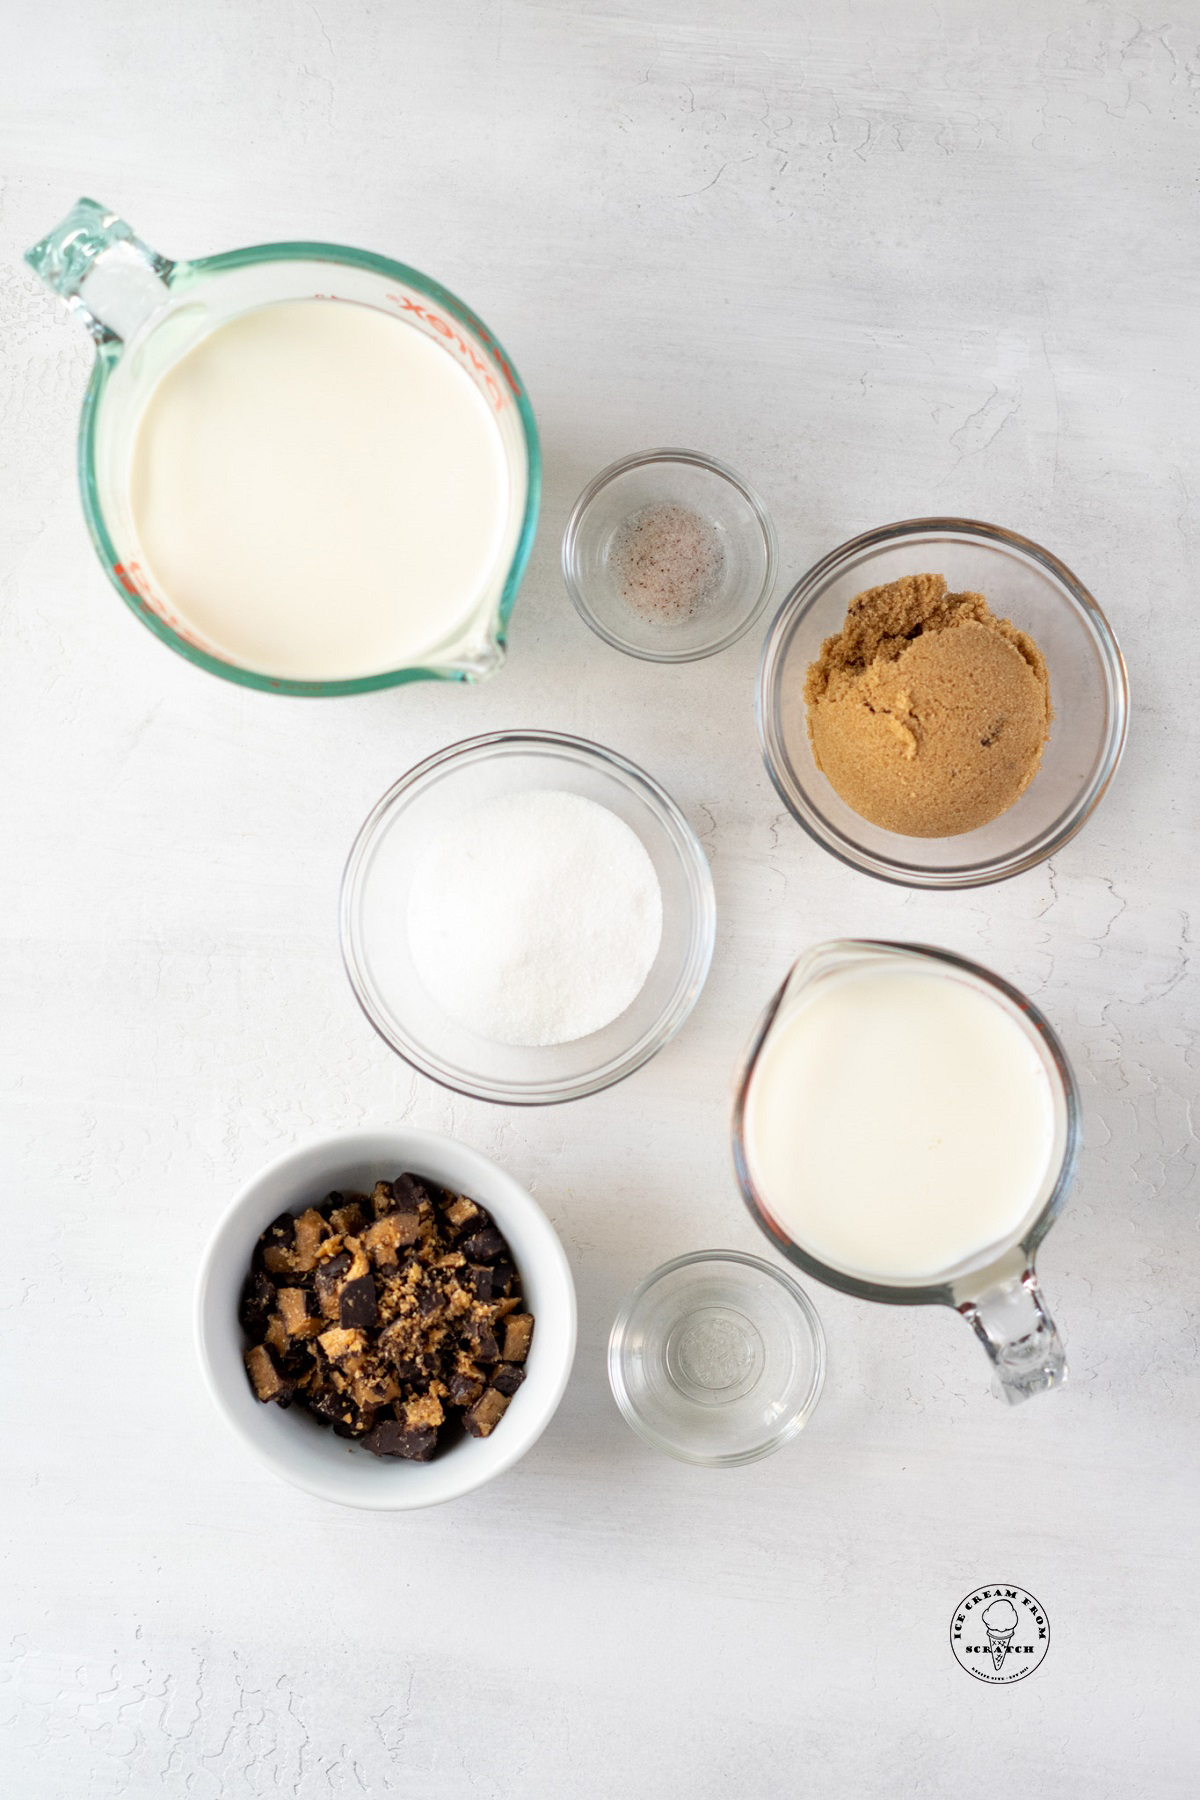 The ingredients needed to make homemade butter brickle ice cream, including cream, milk, brown sugar, and toffee pieces.